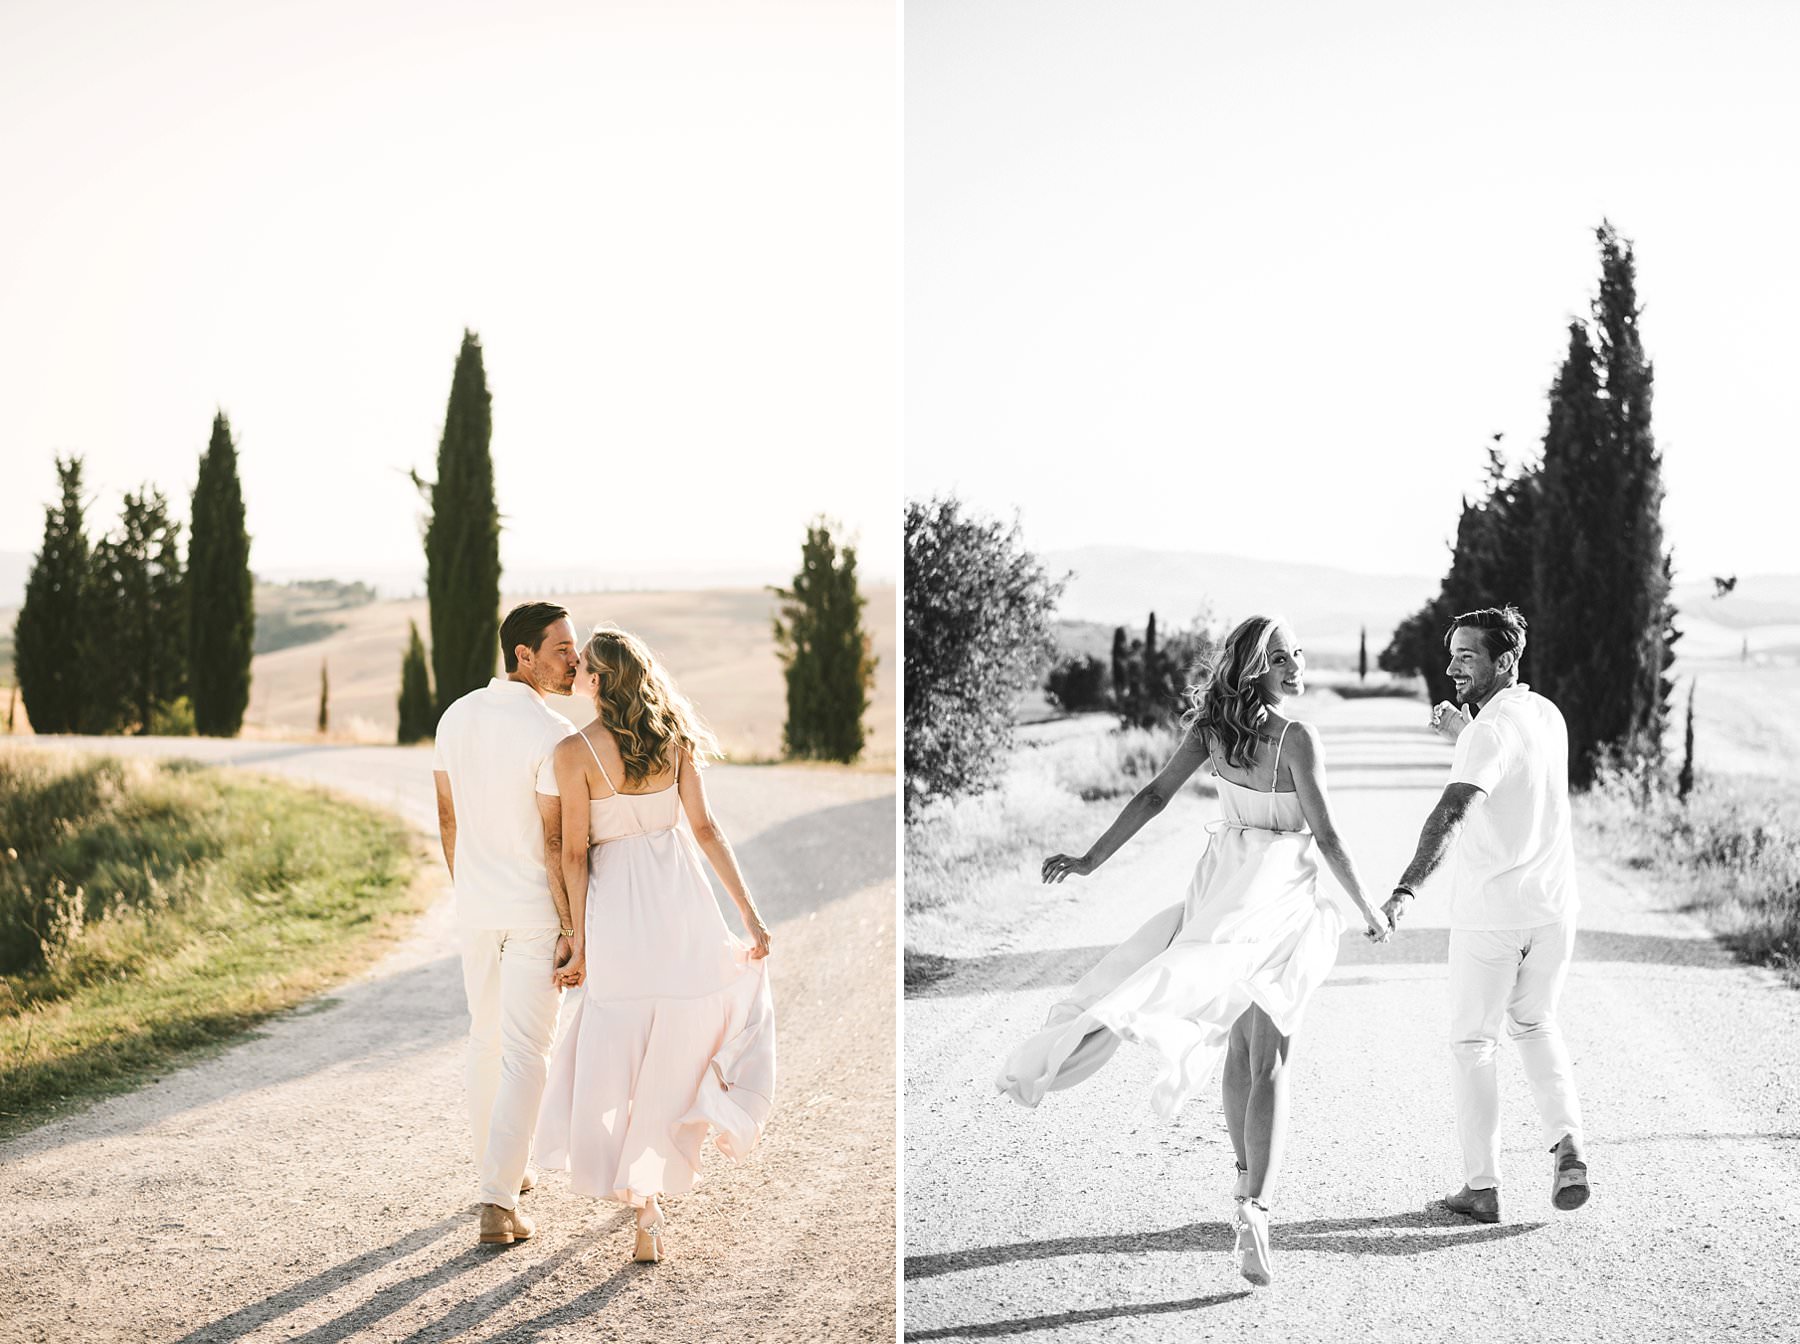 Romantic, intimate and elegant engagement photo shoot in Tuscany countryside of Pienza in the Val D'Orcia area with cypresses street and rolling hills as background